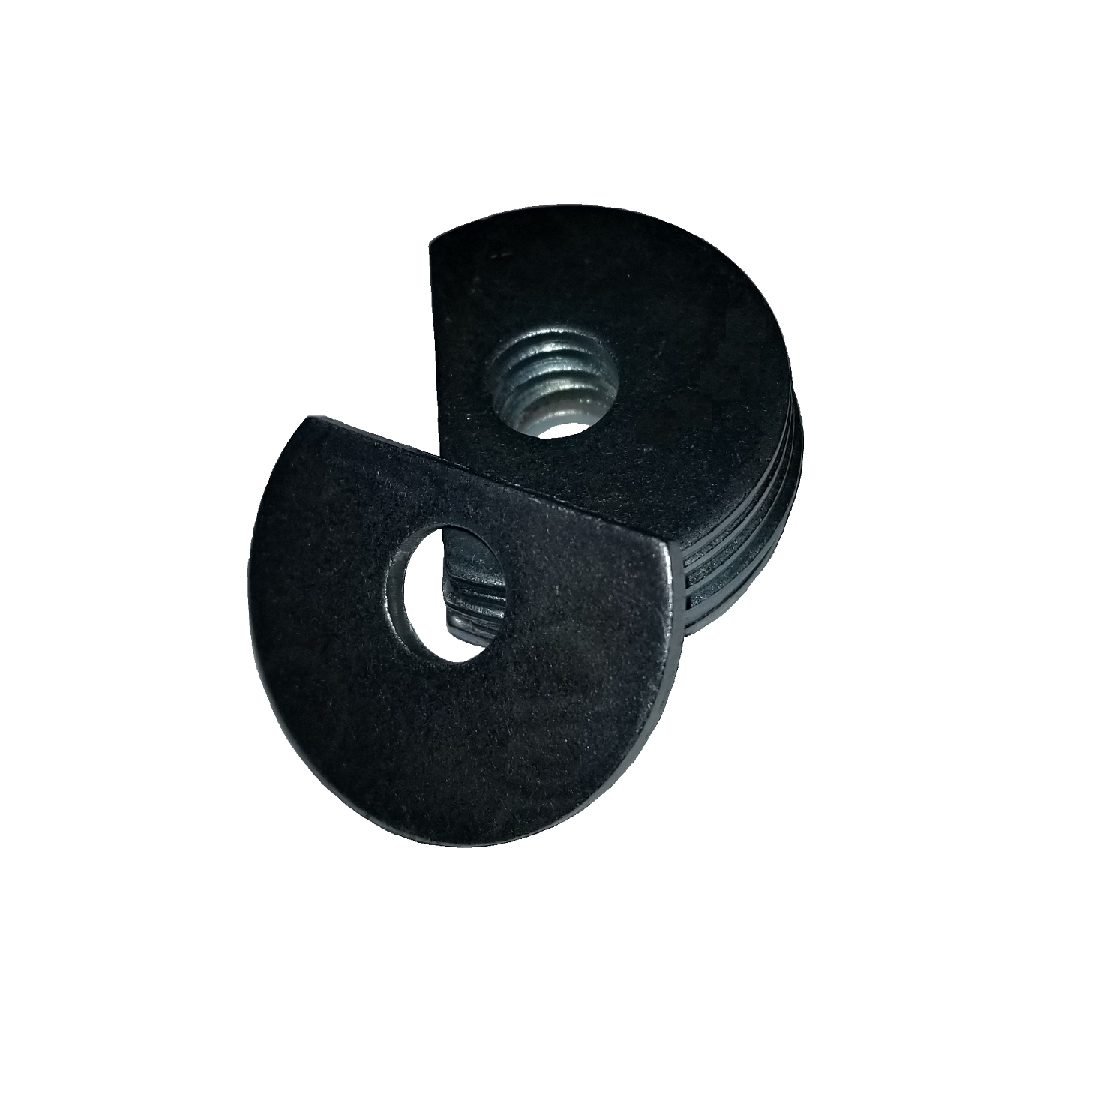 Clipped OD Washer - 0.687 ID, 1.500 OD, 0.187 Thick, Spring Steel - Hard, Zinc & Clear